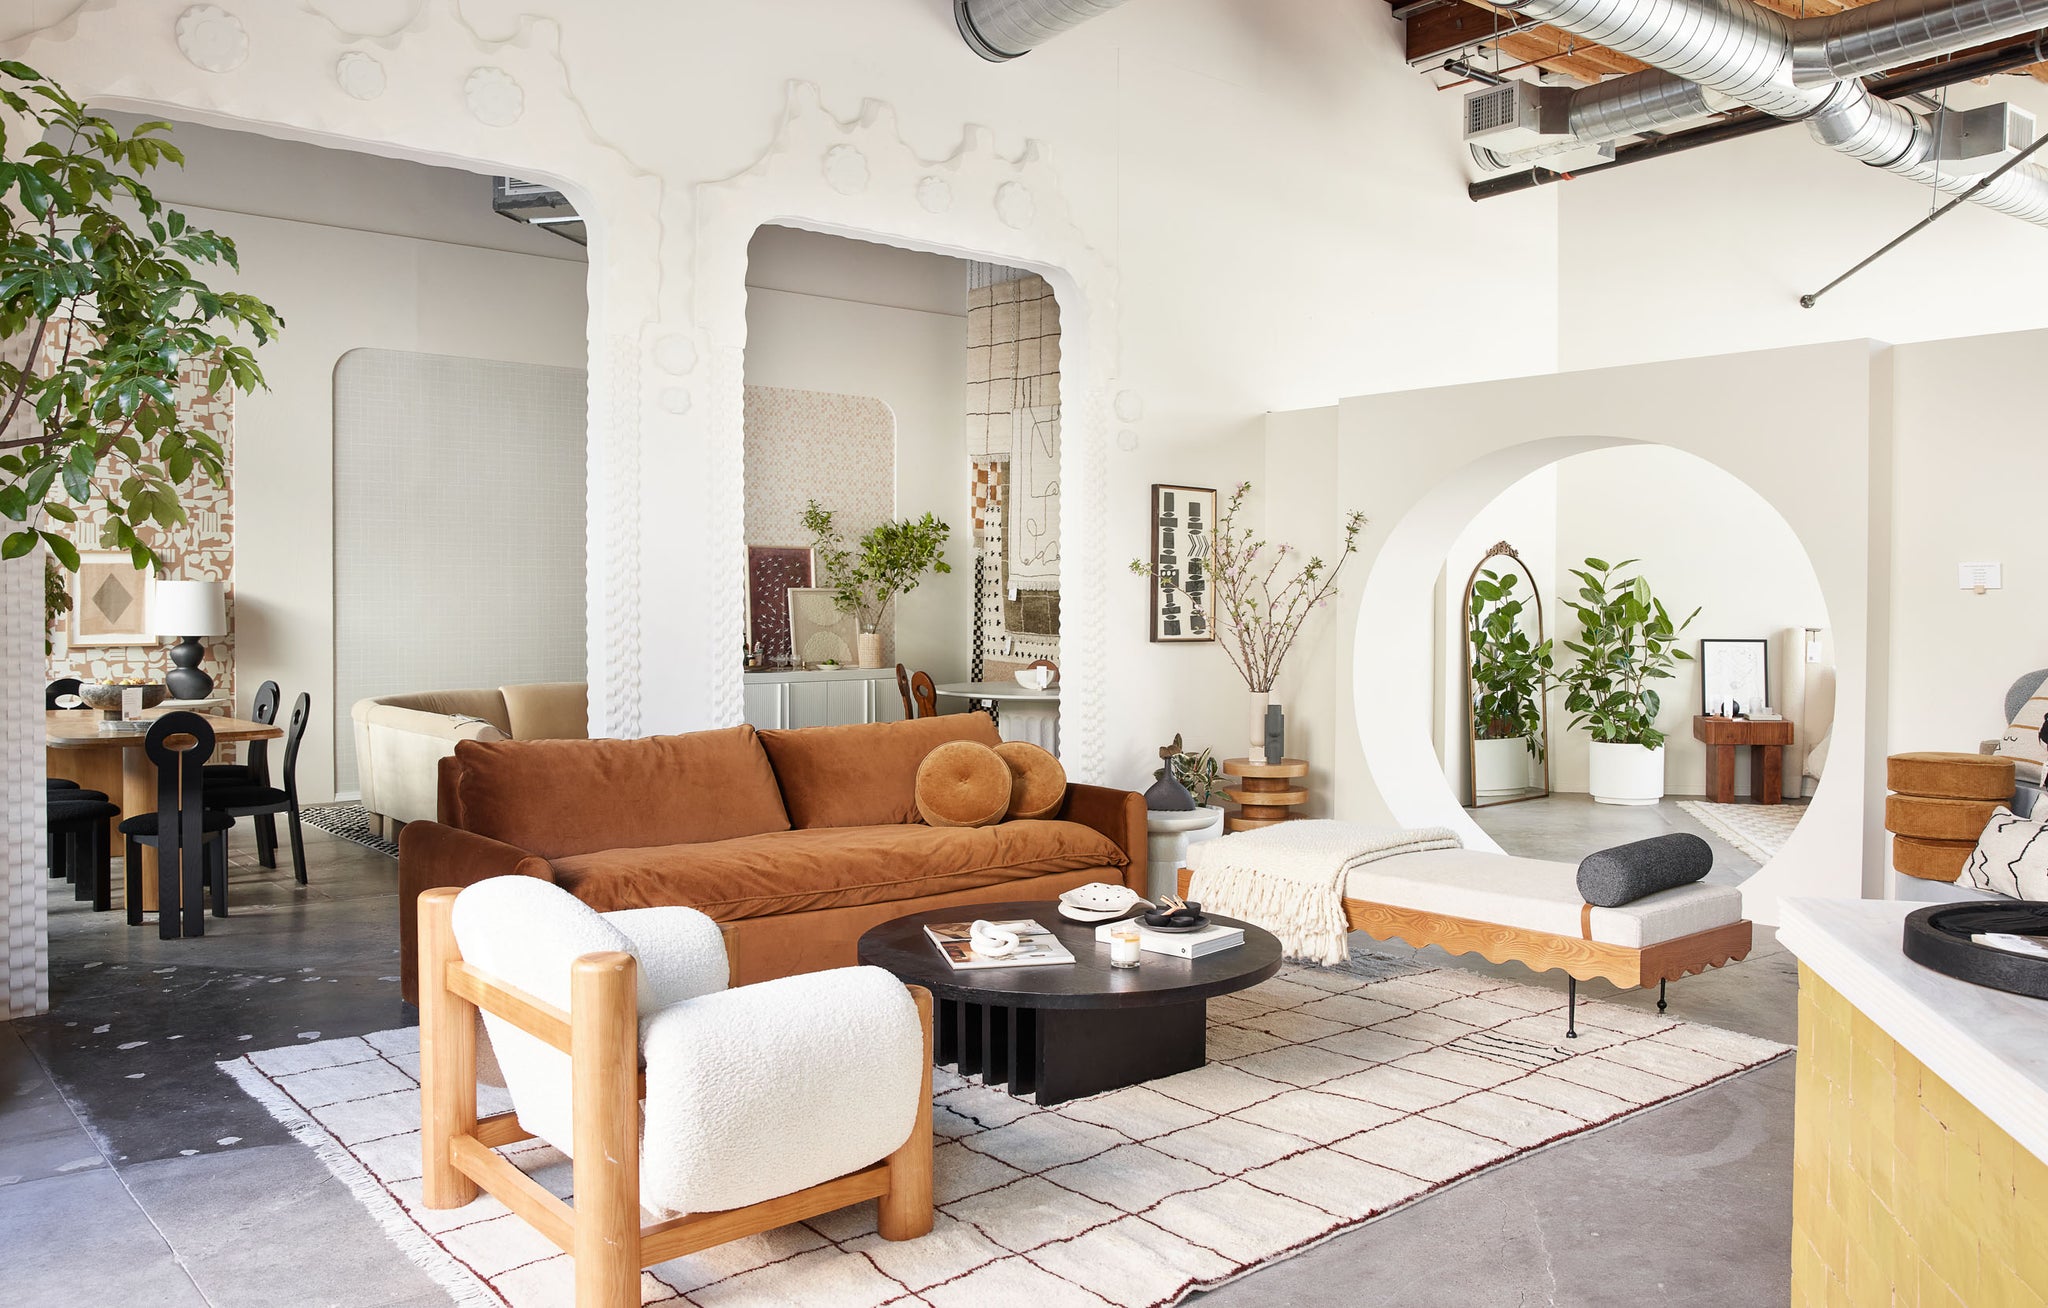 A modern home set-up is displayed in the Sarah Sherman Samuel x Lulu and Georgia pop-up in LA. A brown velvet sofa is flanked by a modern rippled daybed and a sherpa-covered accent chair. Behind the living room is a dining room with wooden dining table and black curved chairs and a seating area with a light taupe sectional sofa.